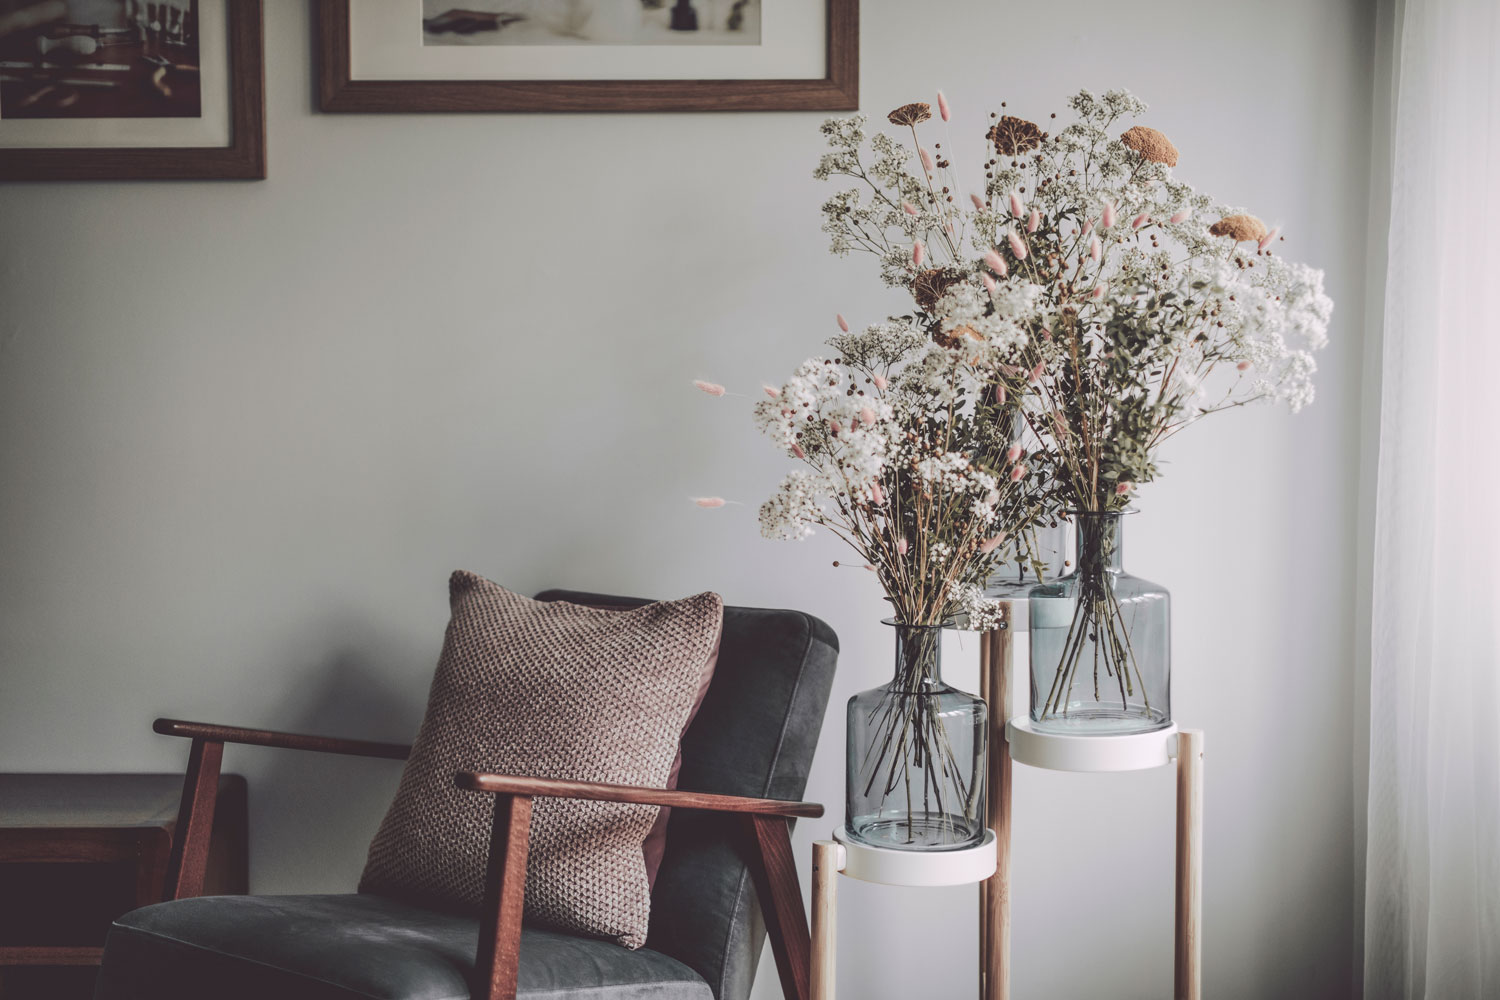 A small wooden chair with gray foam and a pillow next to flowers